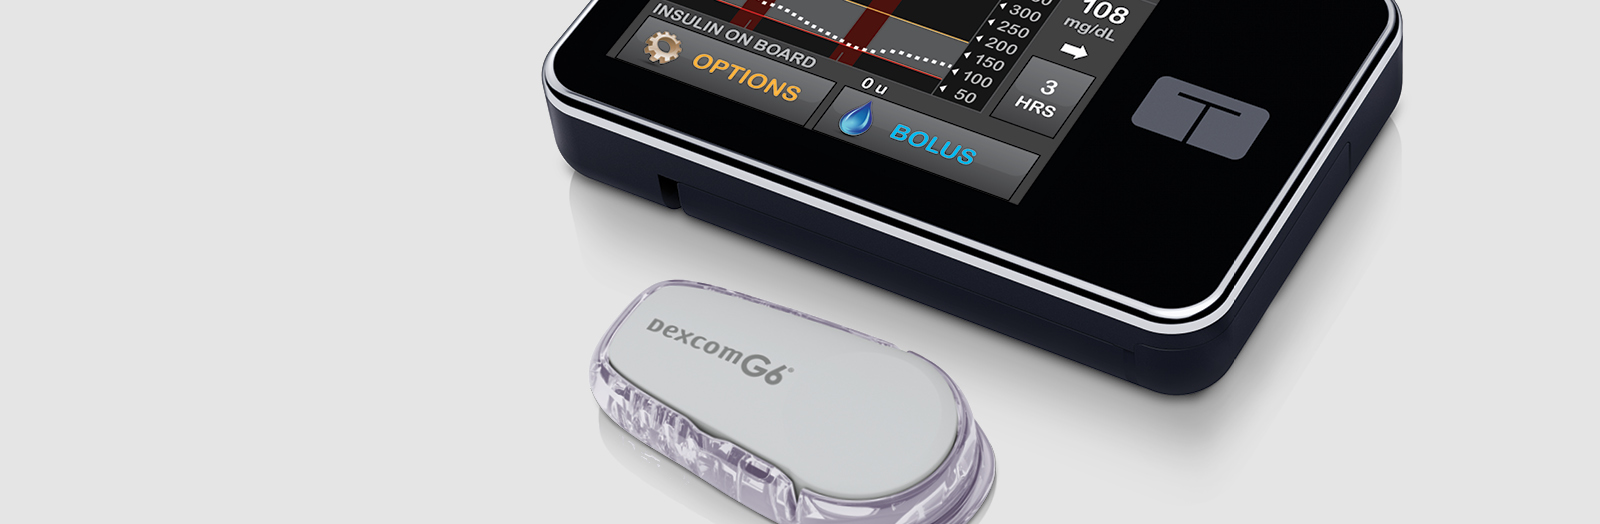 madlavning Skru ned sirene Integrate your t:slim X2 insulin pump with the Dexcom G6 CGM System